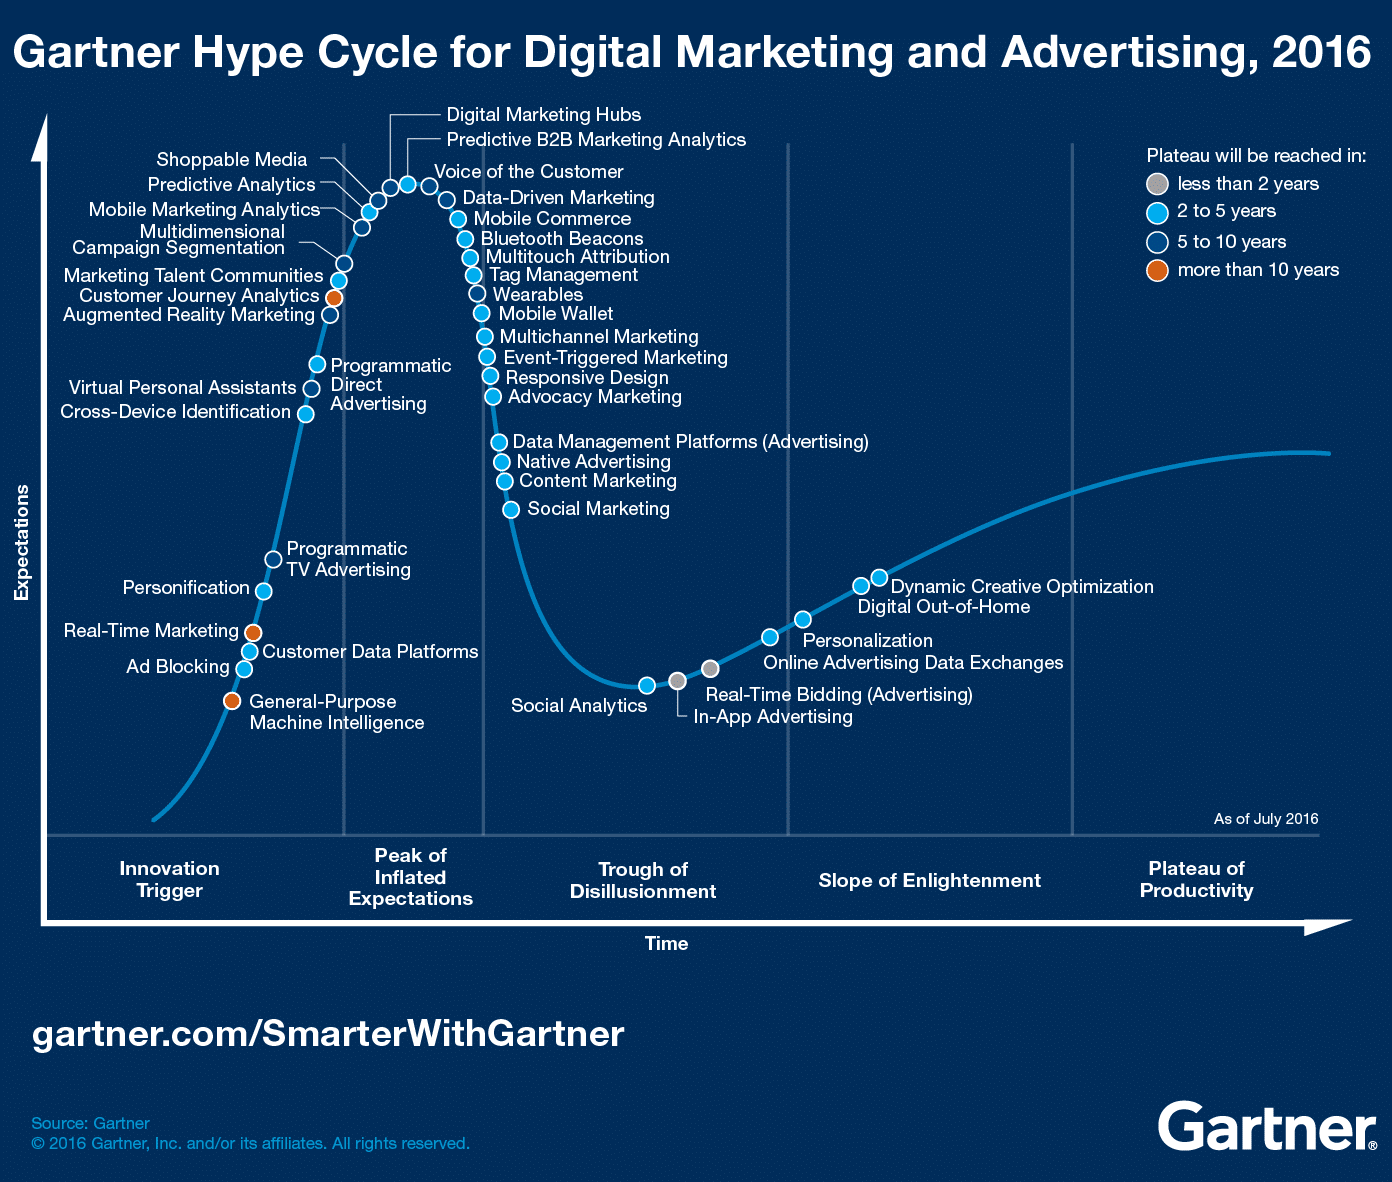 Digital marketing and advertising hype cycle for 2016 infographic statistics